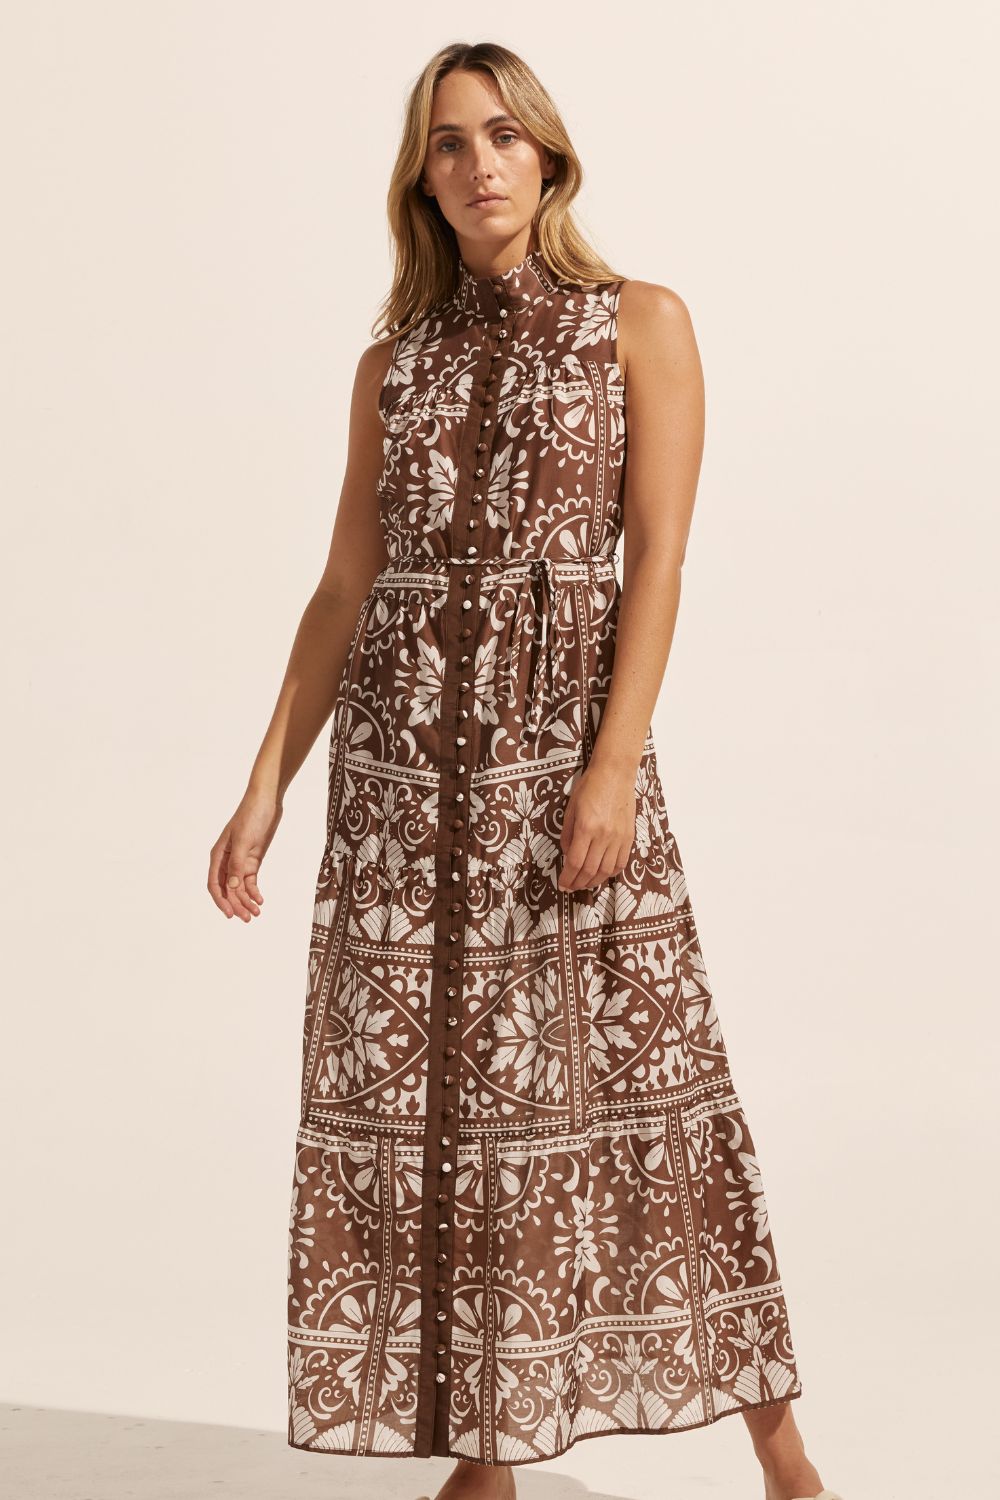 brown and white print, high neck, buttons down centre, thin fabric belt, sleeveless, dress